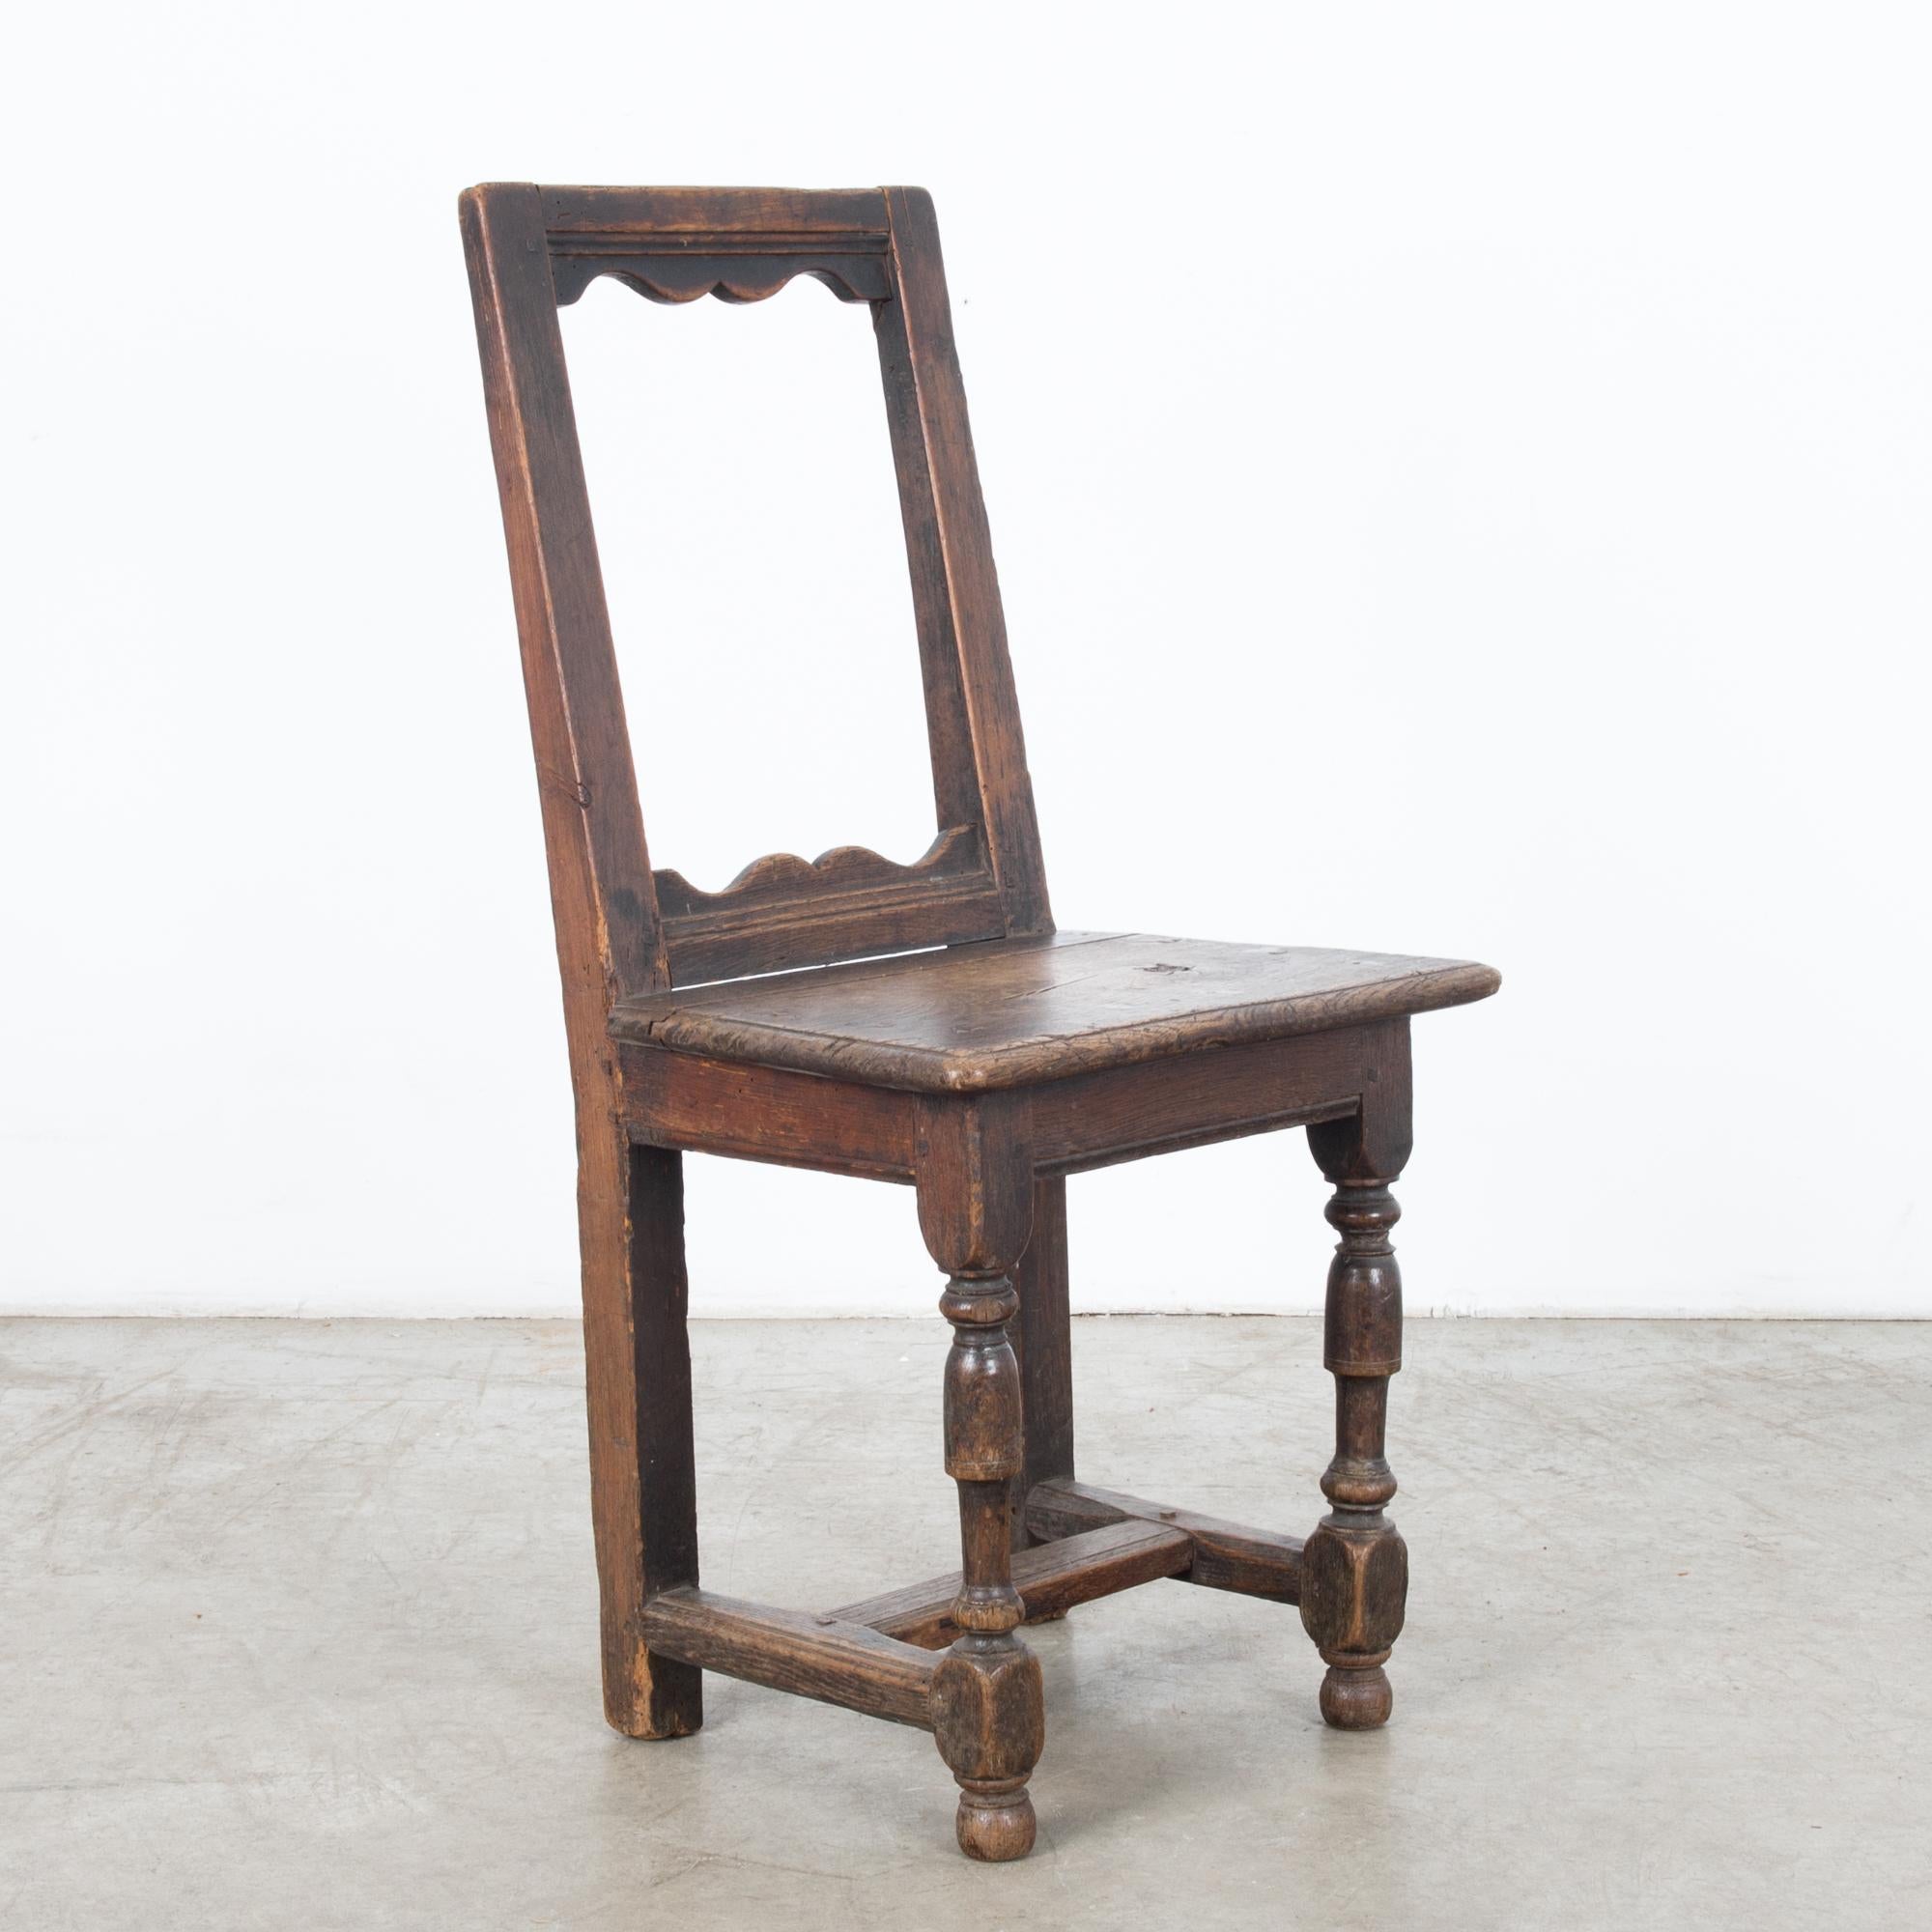 A wooden chair from Belgium, circa 1800. An upright shape with a striking open-framed backrest and a square paneled seat upon turned legs. The dark, softly polished wood has weathered into a patina with areas of highlight and shadow. The form of the